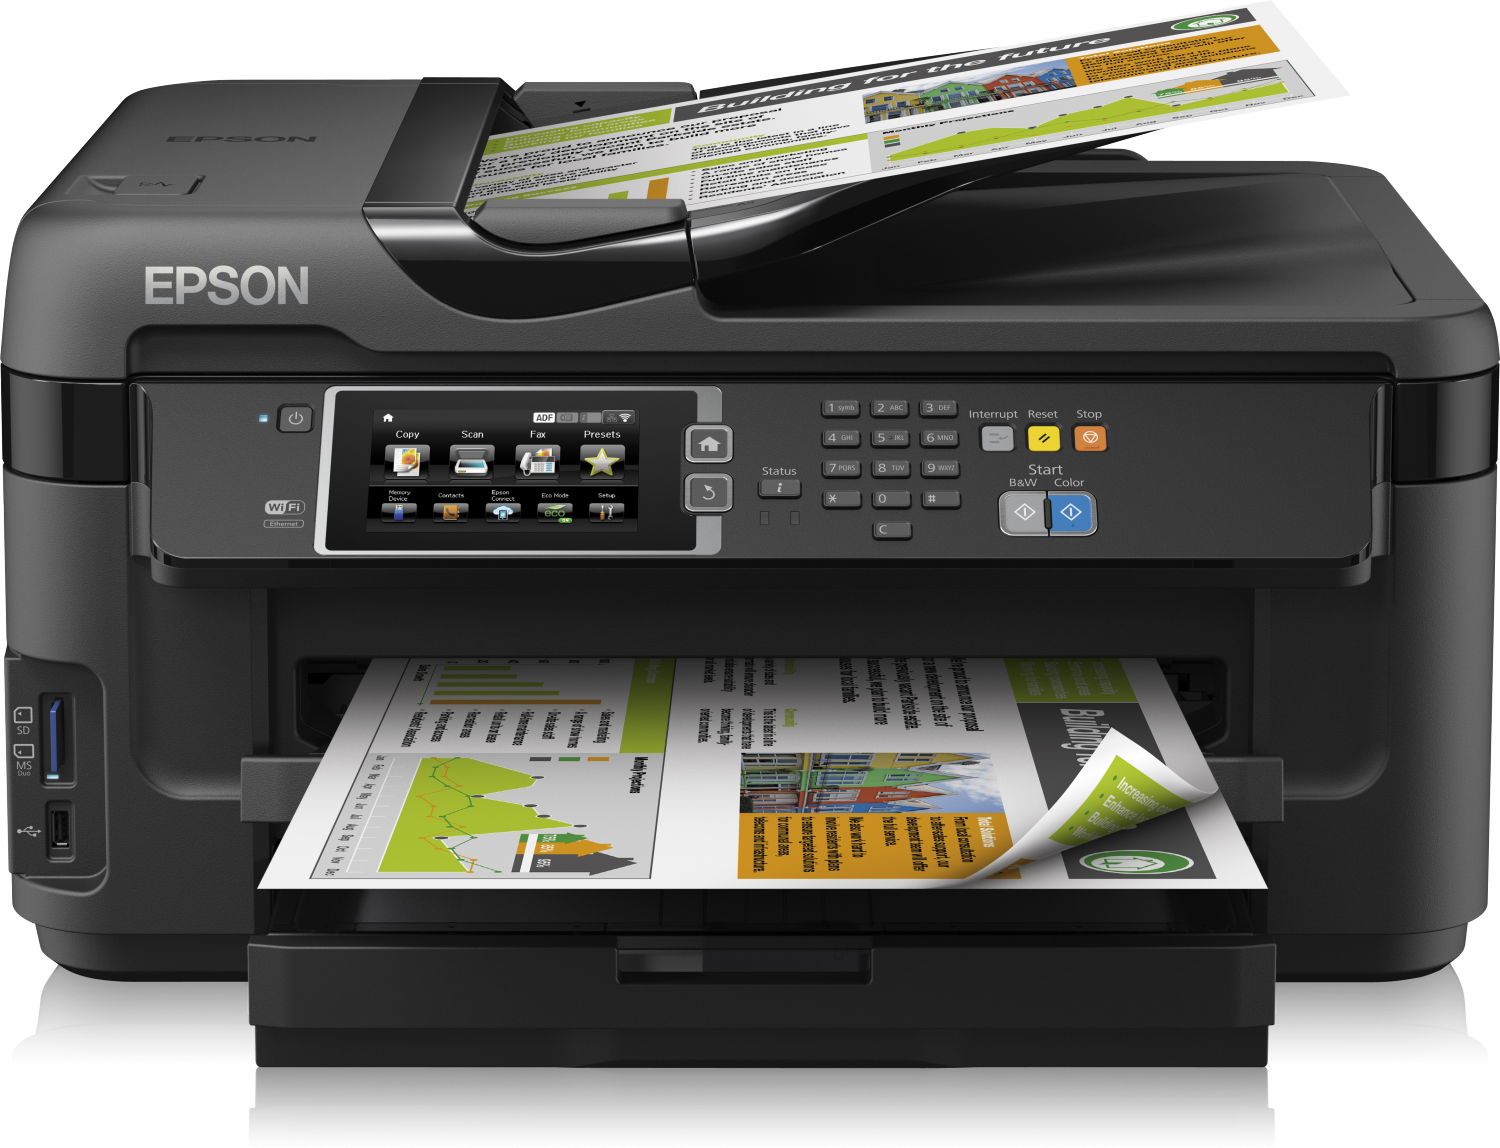 Epson WF-7610 Driver Ubuntu 16.04 How-to Download & Install - Featured